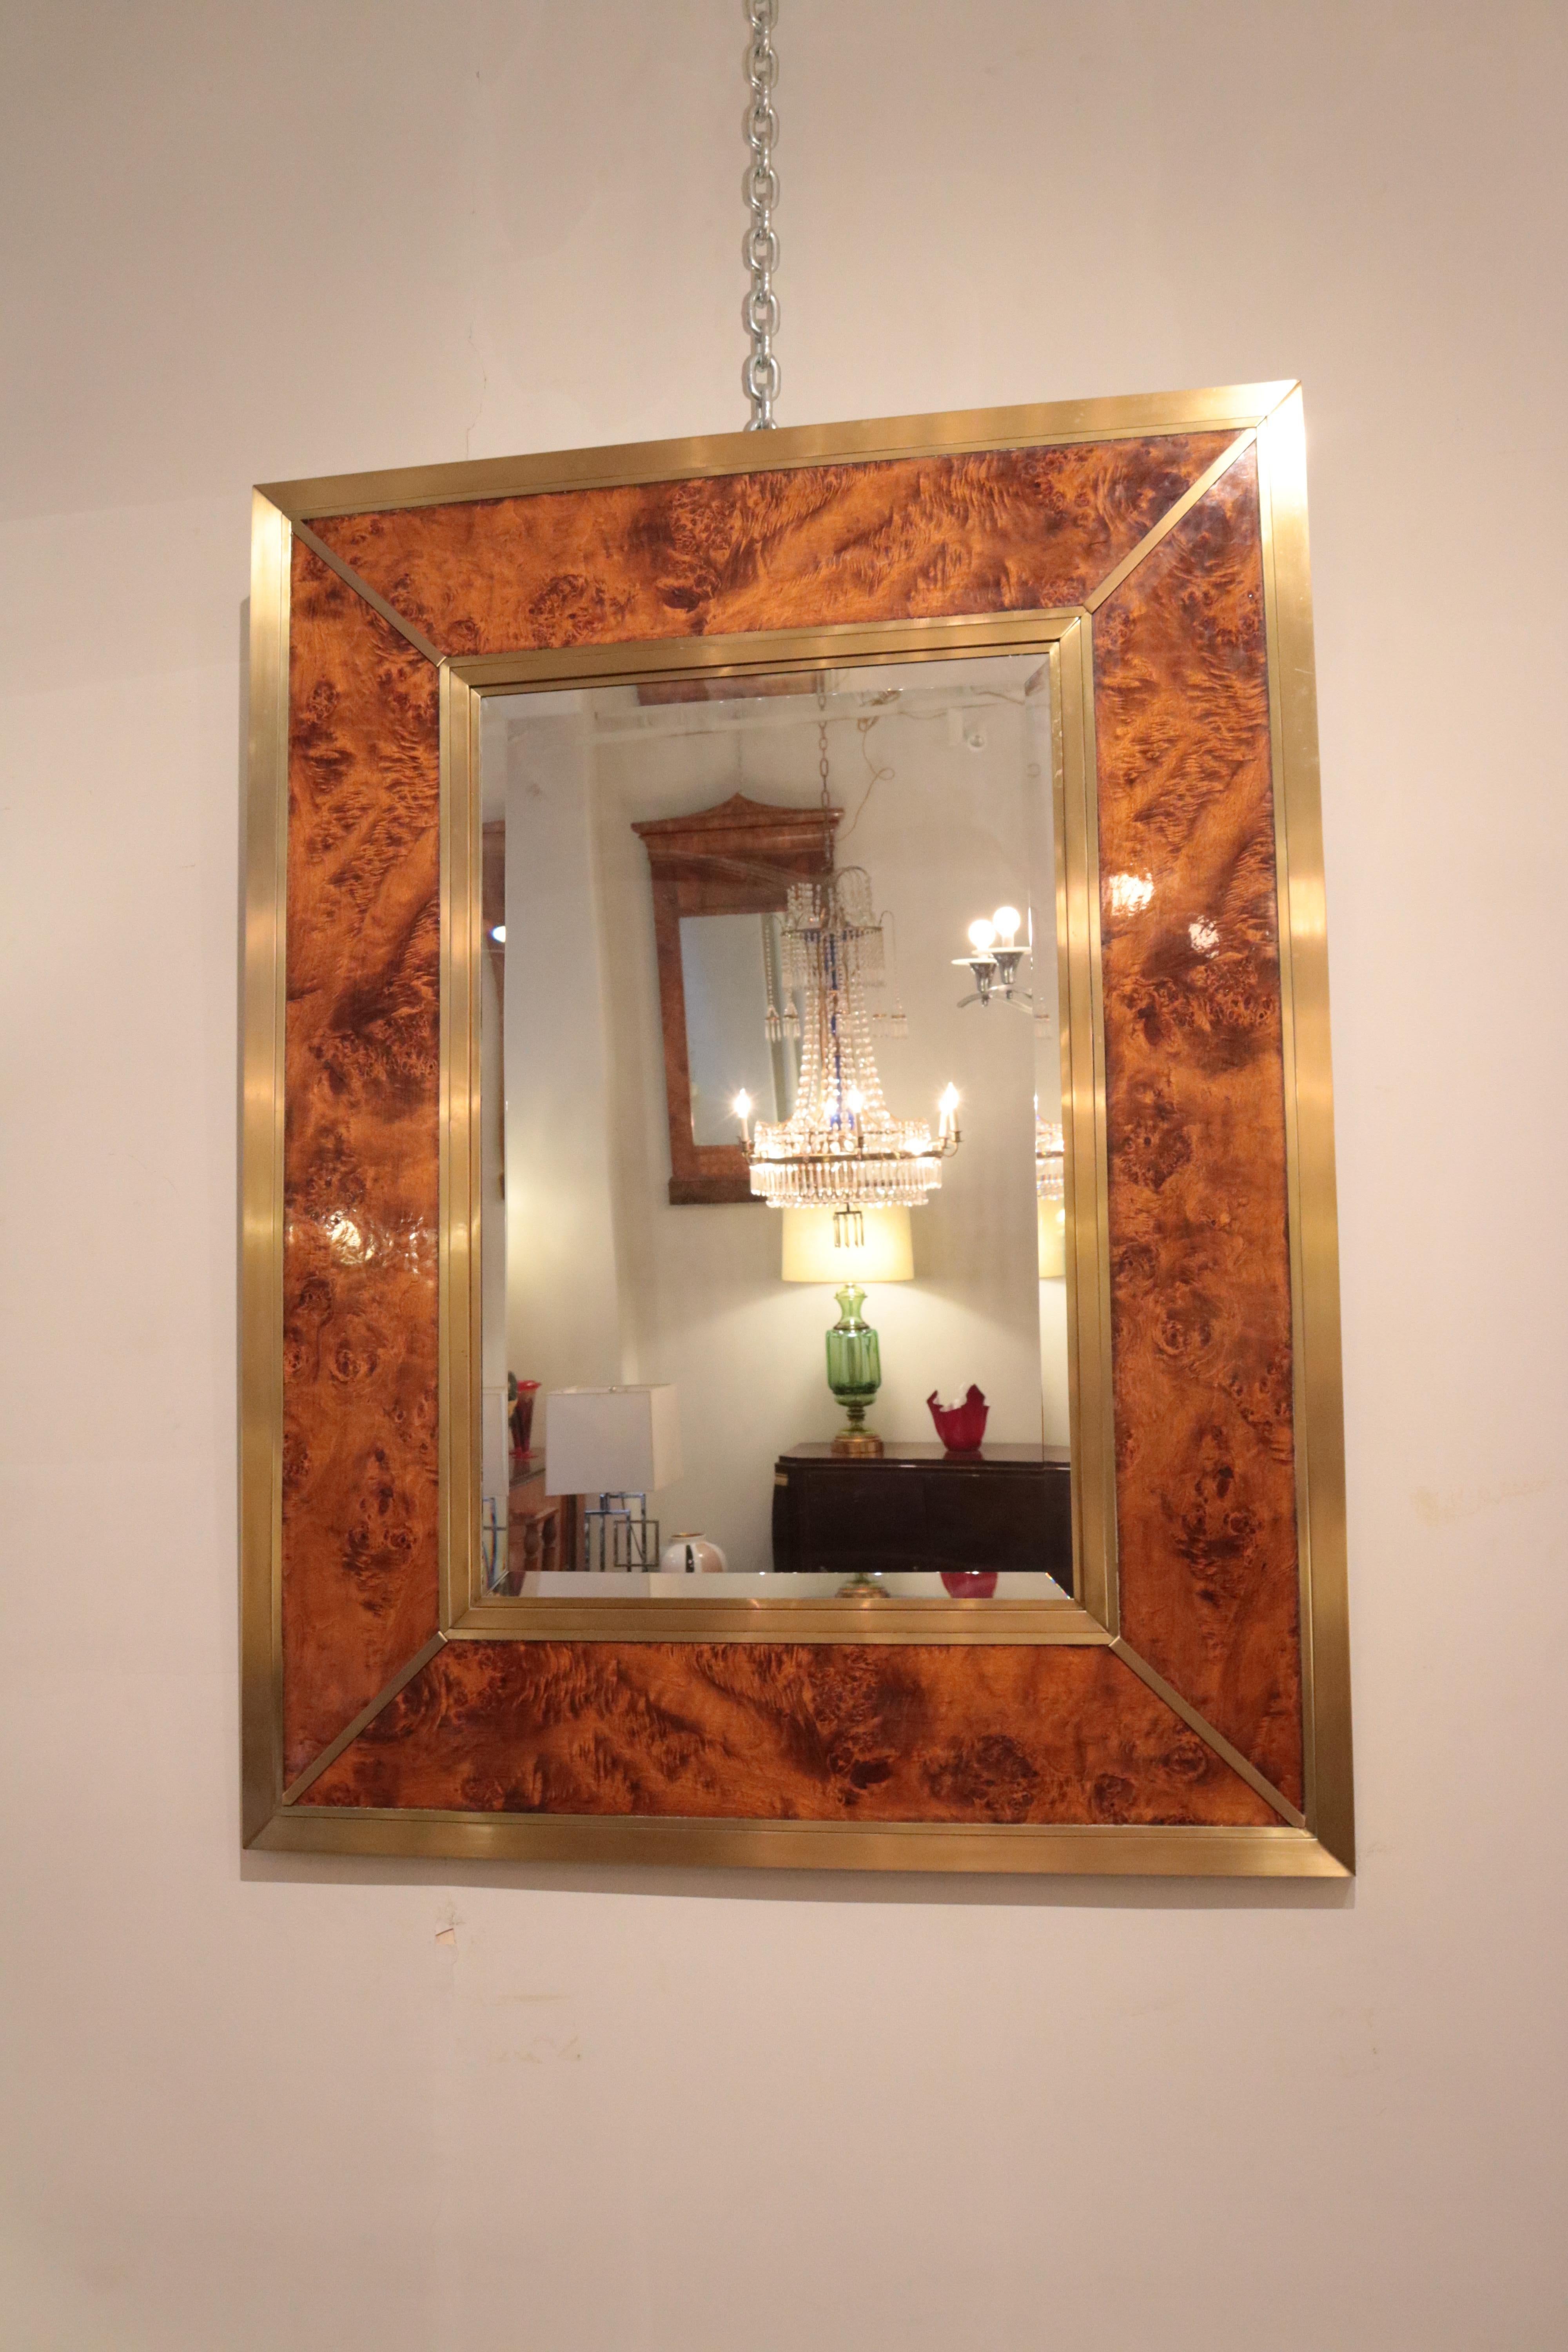 A modernist mirror crafted of walnut burl
and patinated brass with central beveled mirror.